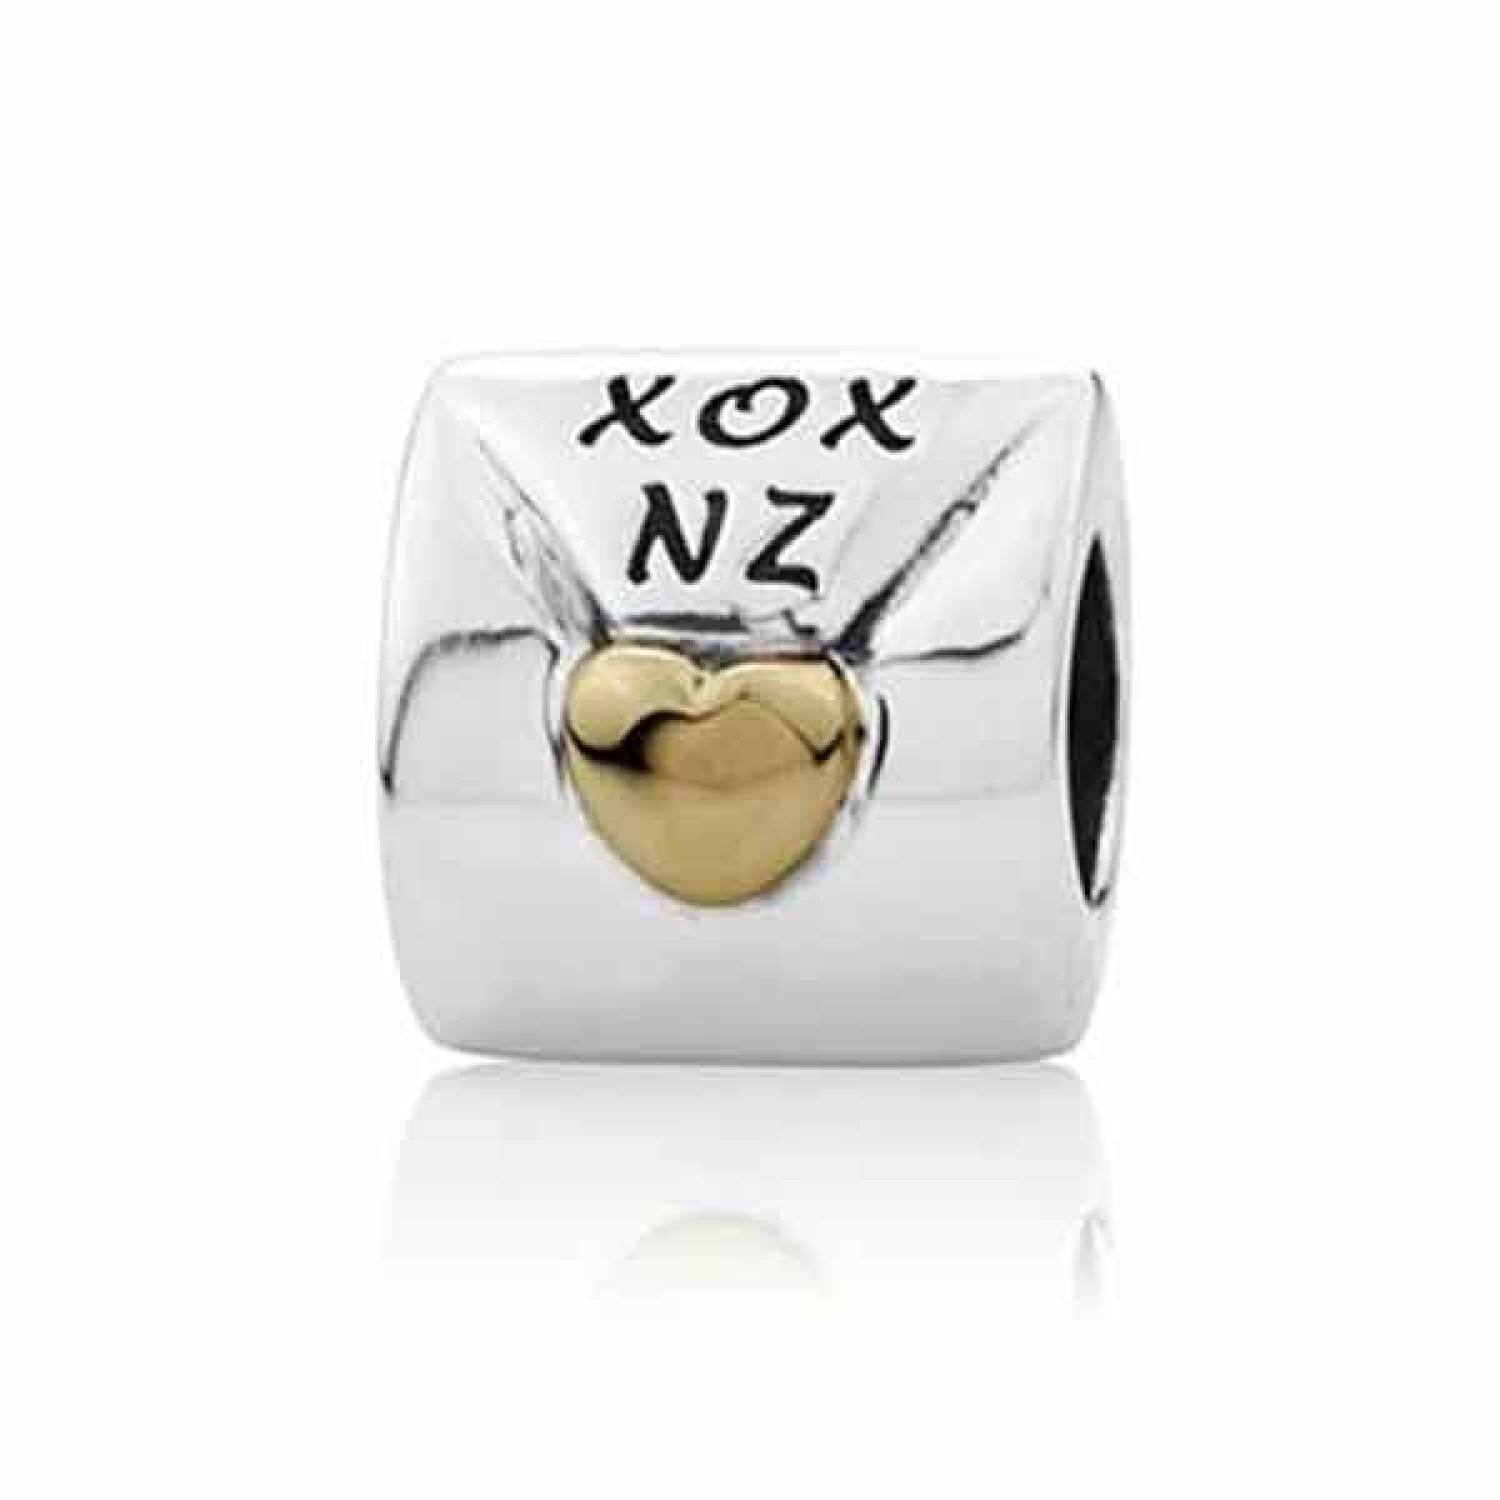 LK133G Evolve Charm Letter. 3 Months No Payments and Interest for Q Card holders.  Nothing is more endearing than handwritten letters expressing true feelings, thoughts and emotions through cherished words.  Evolves precious XOX NZ lette @christies.online